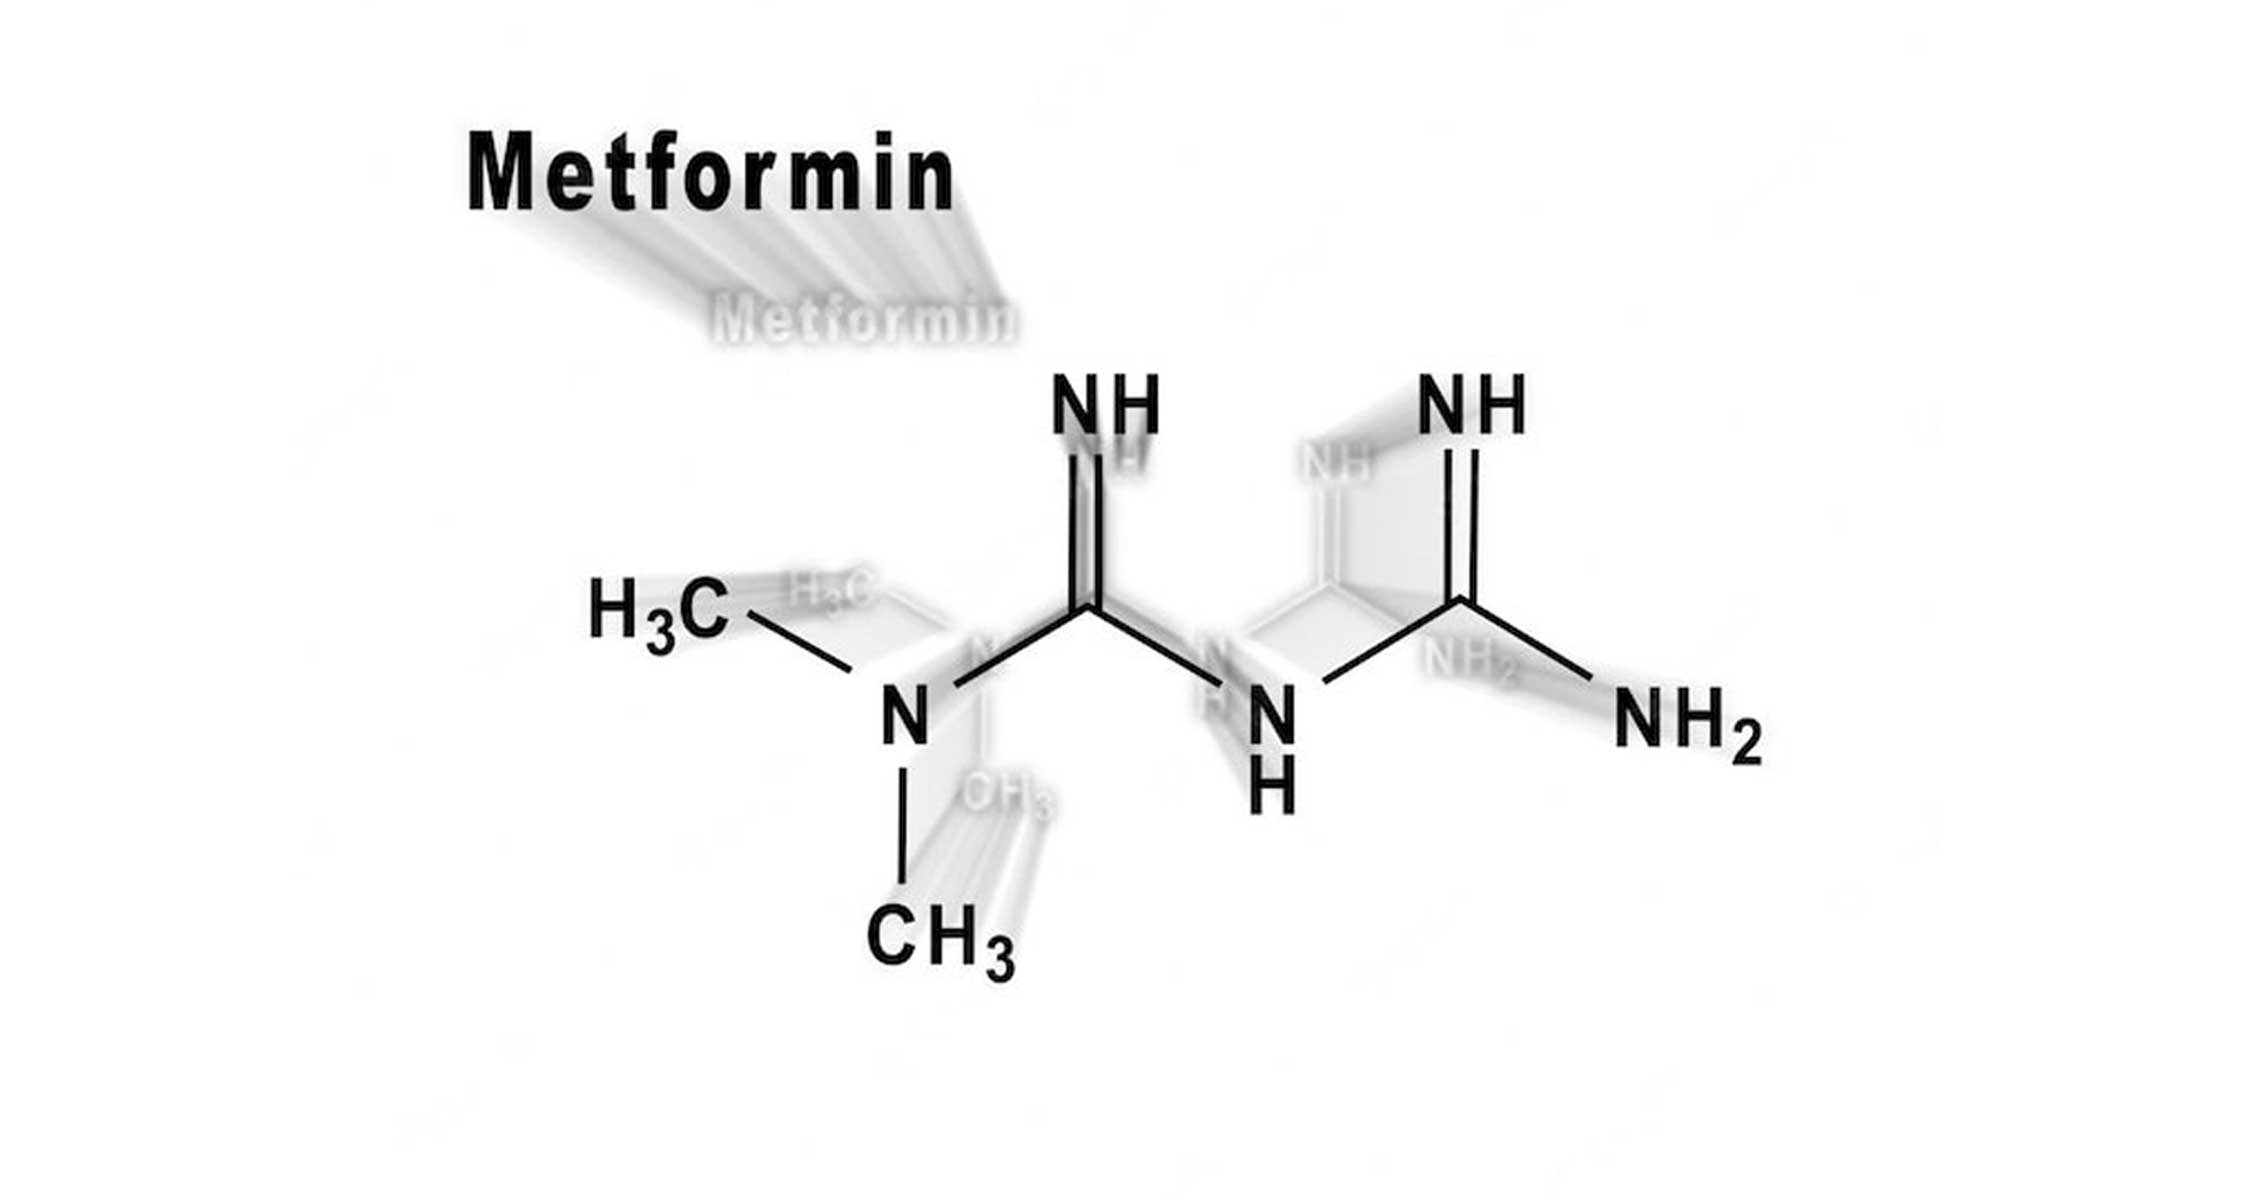 Chemical Structure of Metformin